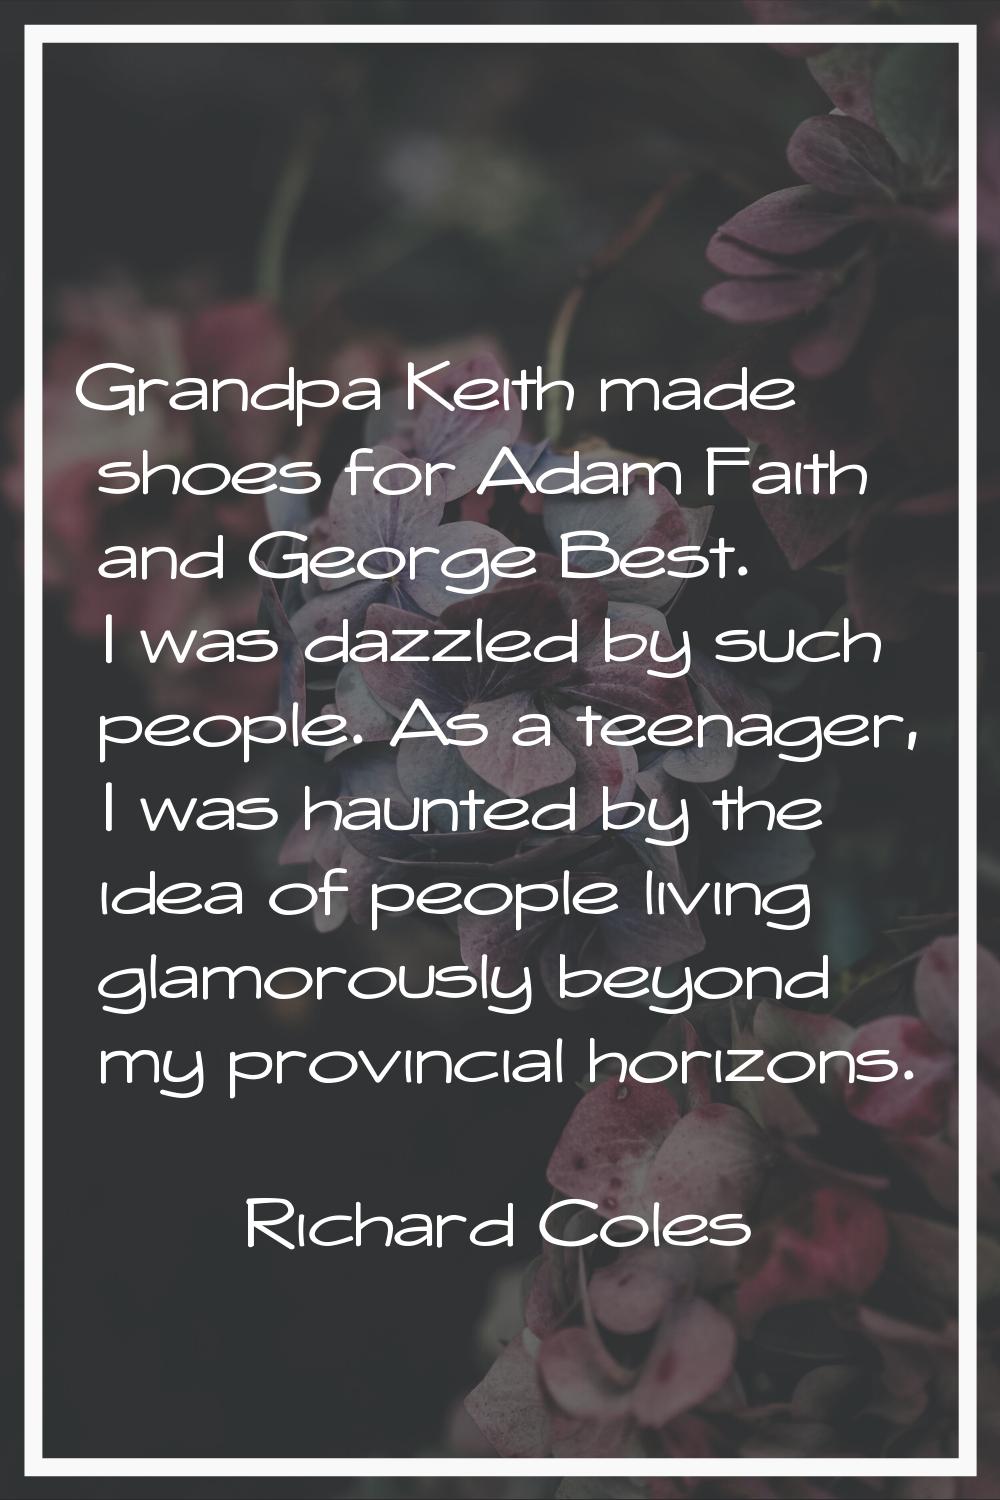 Grandpa Keith made shoes for Adam Faith and George Best. I was dazzled by such people. As a teenage